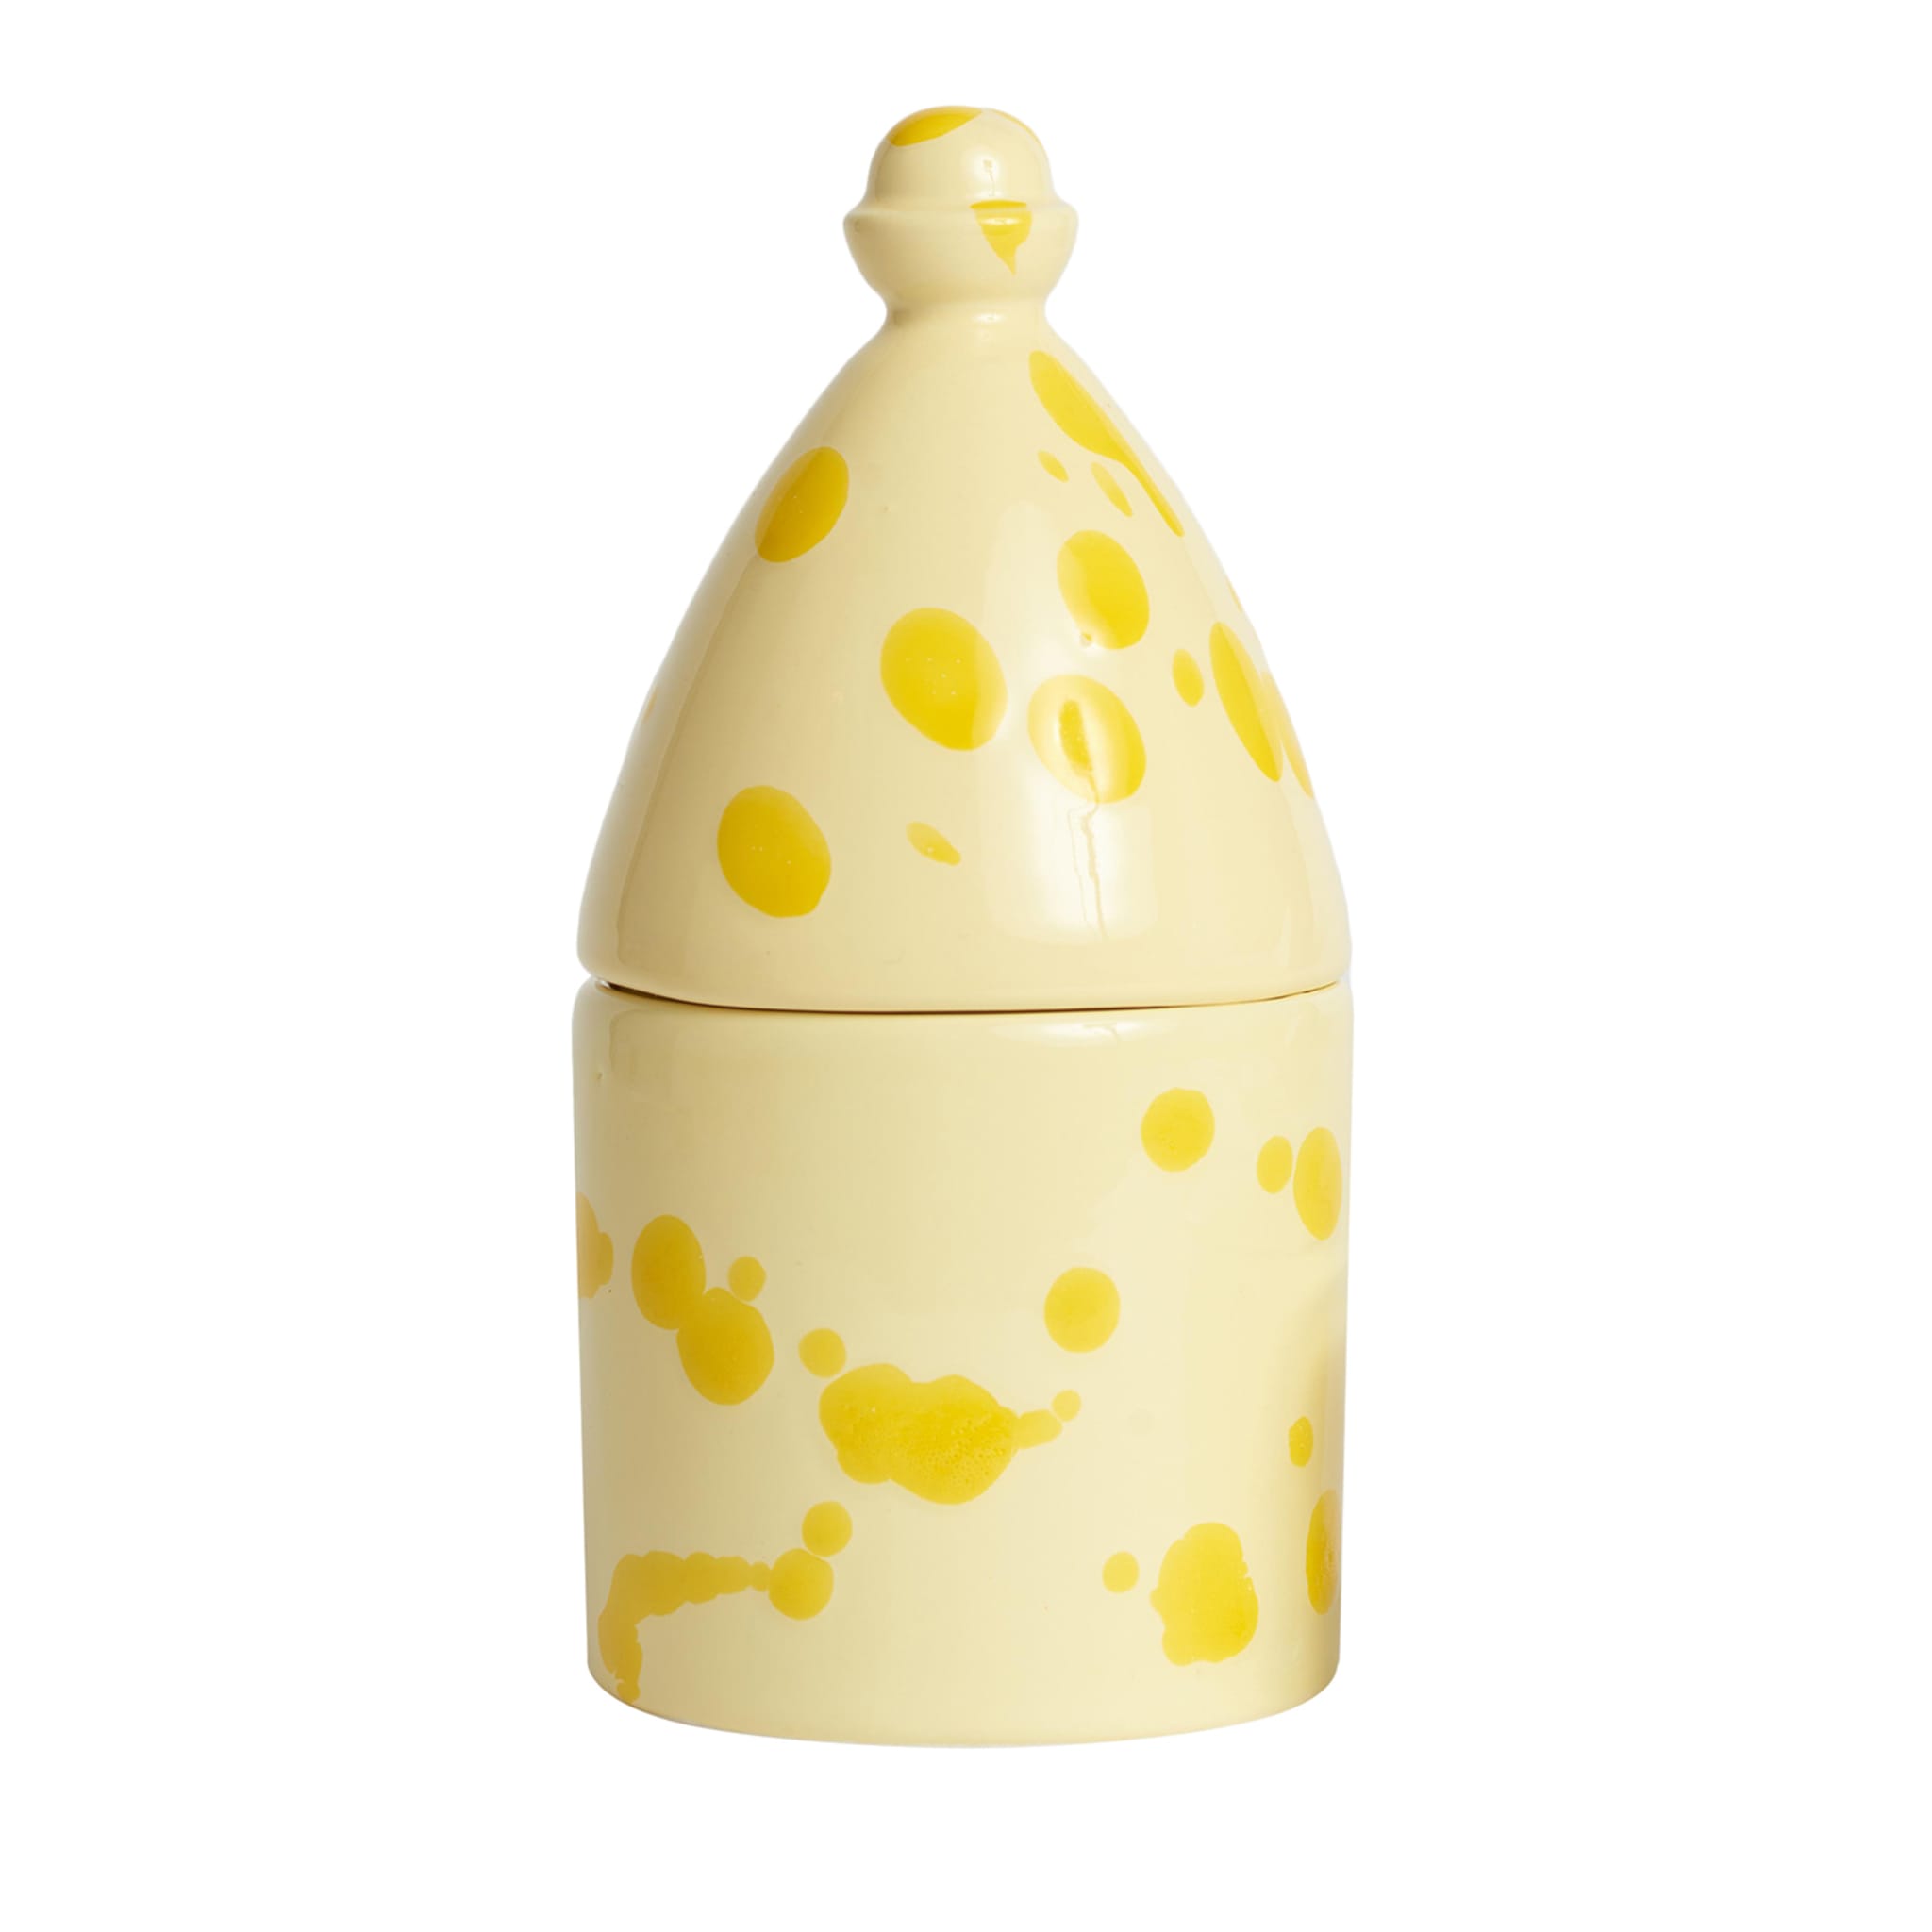 Trullo Cream and Yellow Candle Holder - Alternative view 1